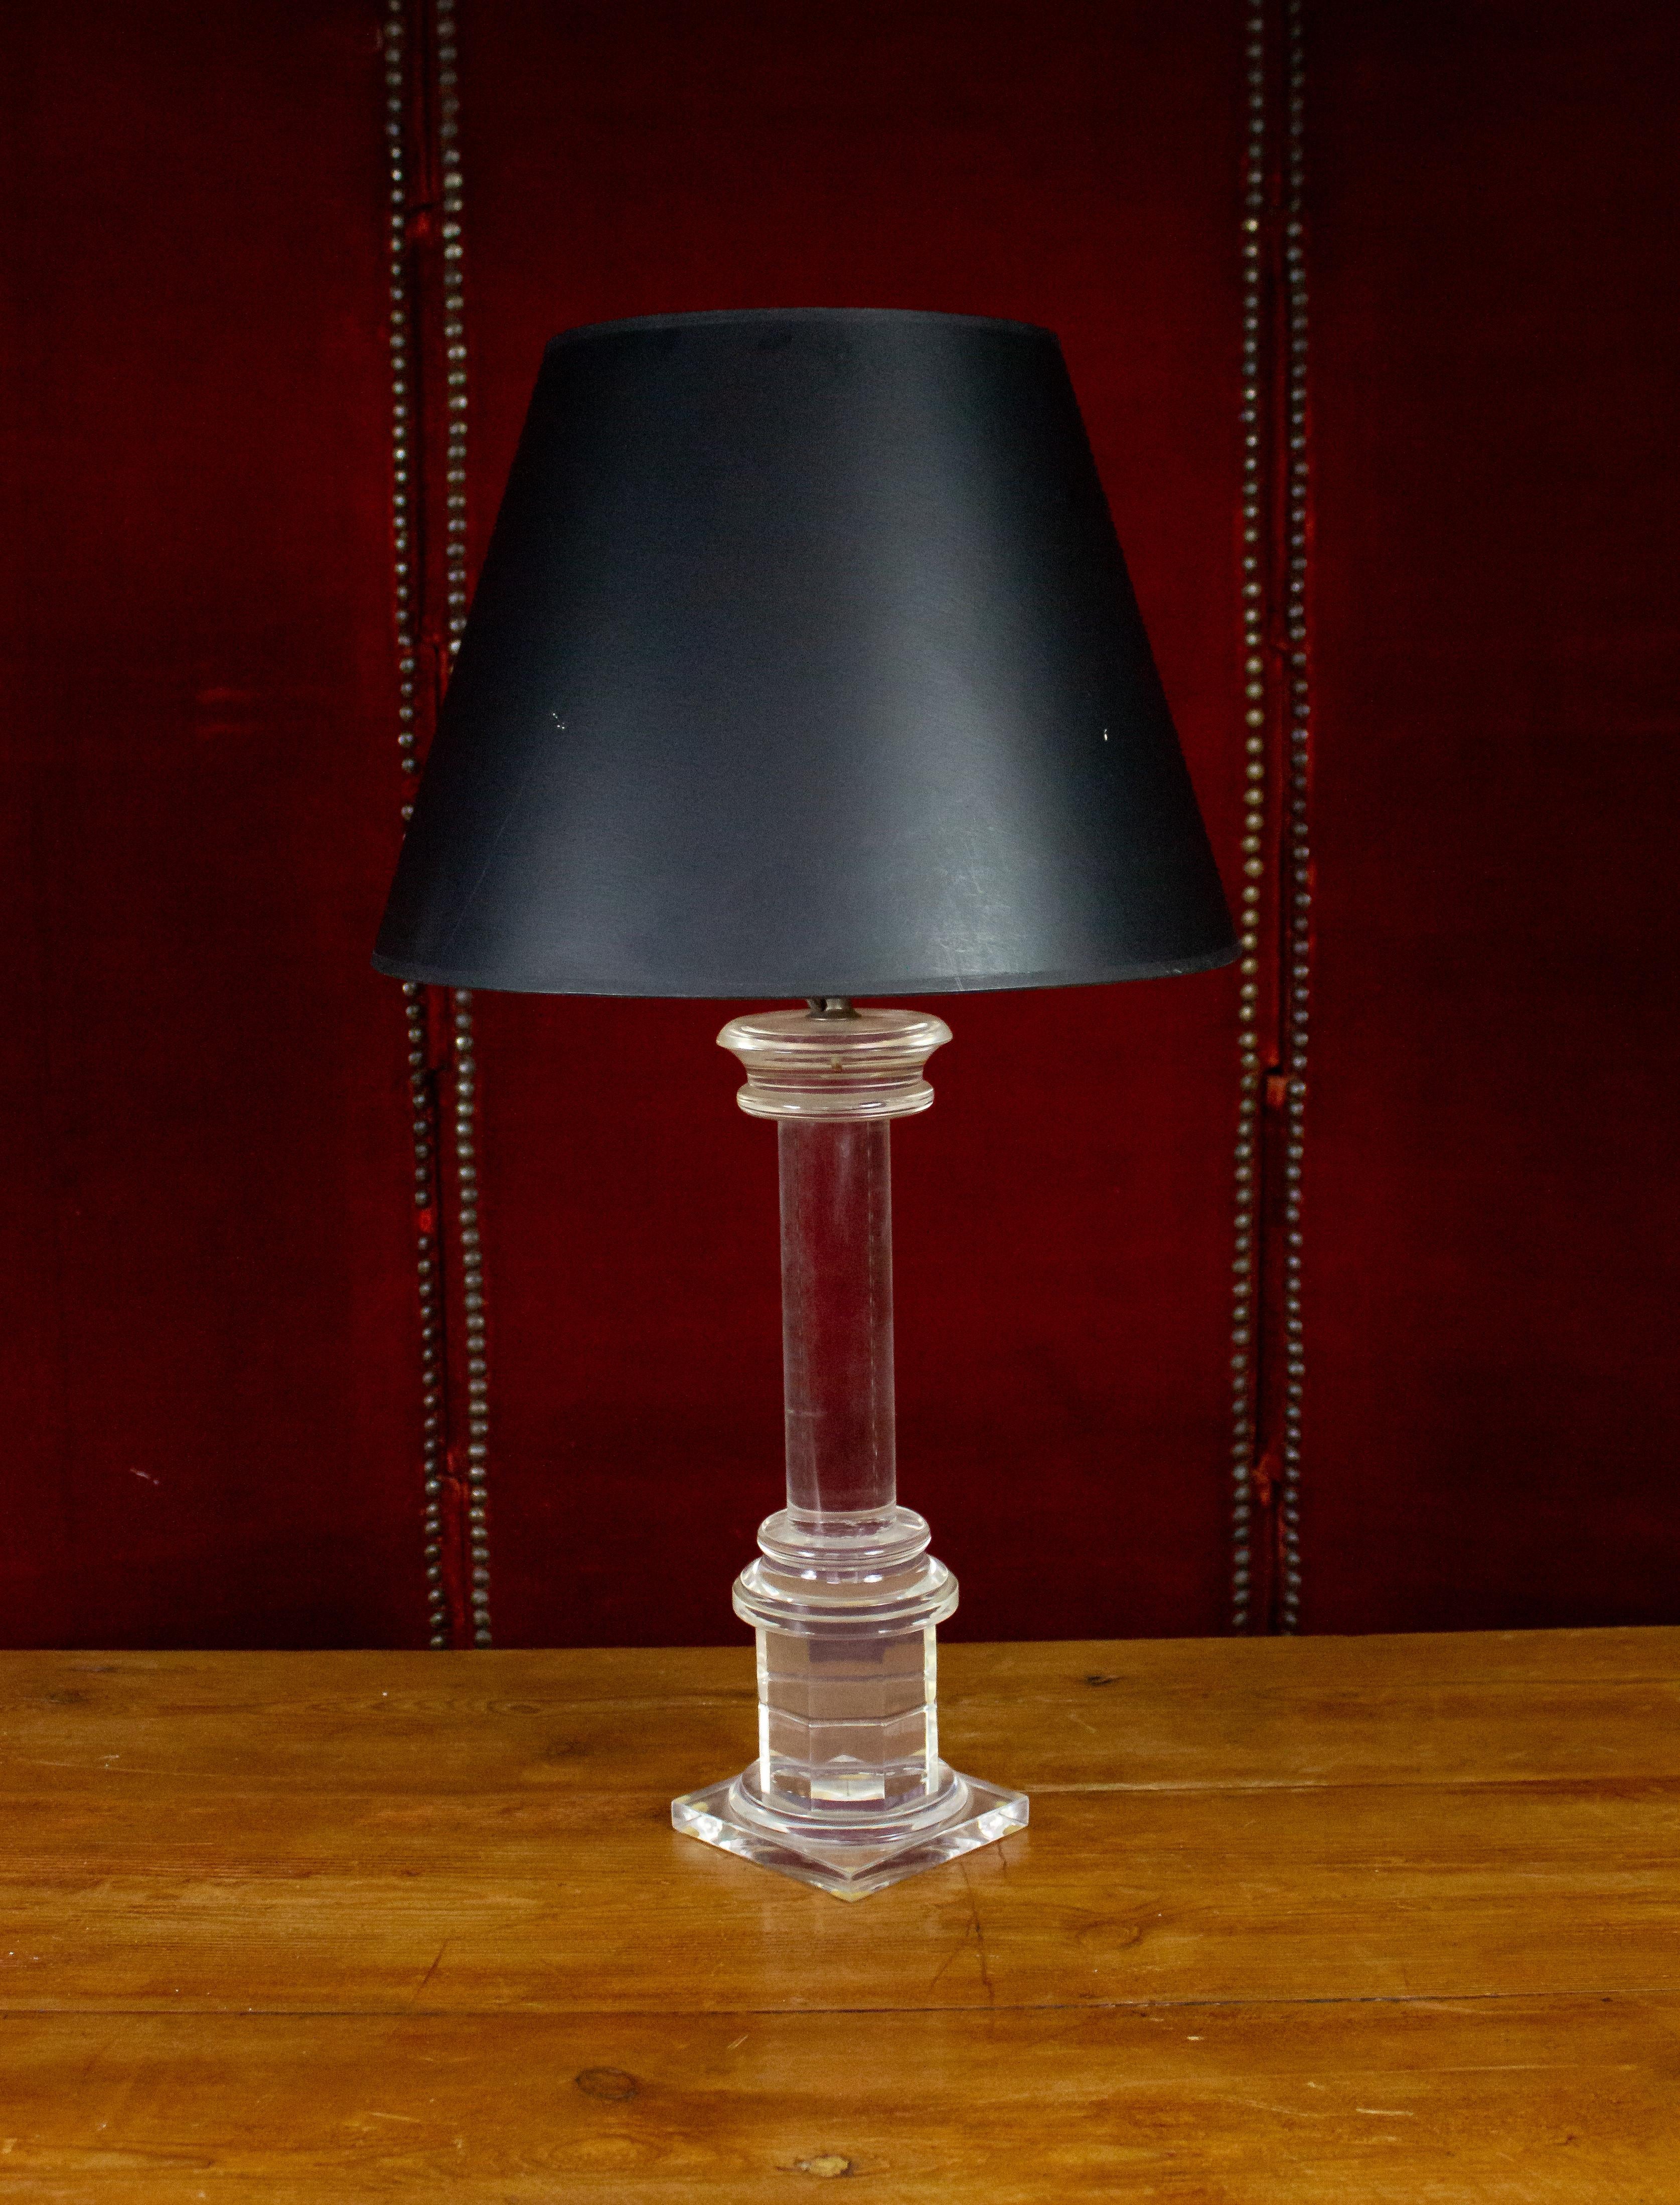 This French 1980s lucite table lamp embodies the classical column design, offering a distinctive blend of vintage charm and modern aesthetics. It has been recently rewired with a silver silk cord, ensuring safe and reliable use for years to come.